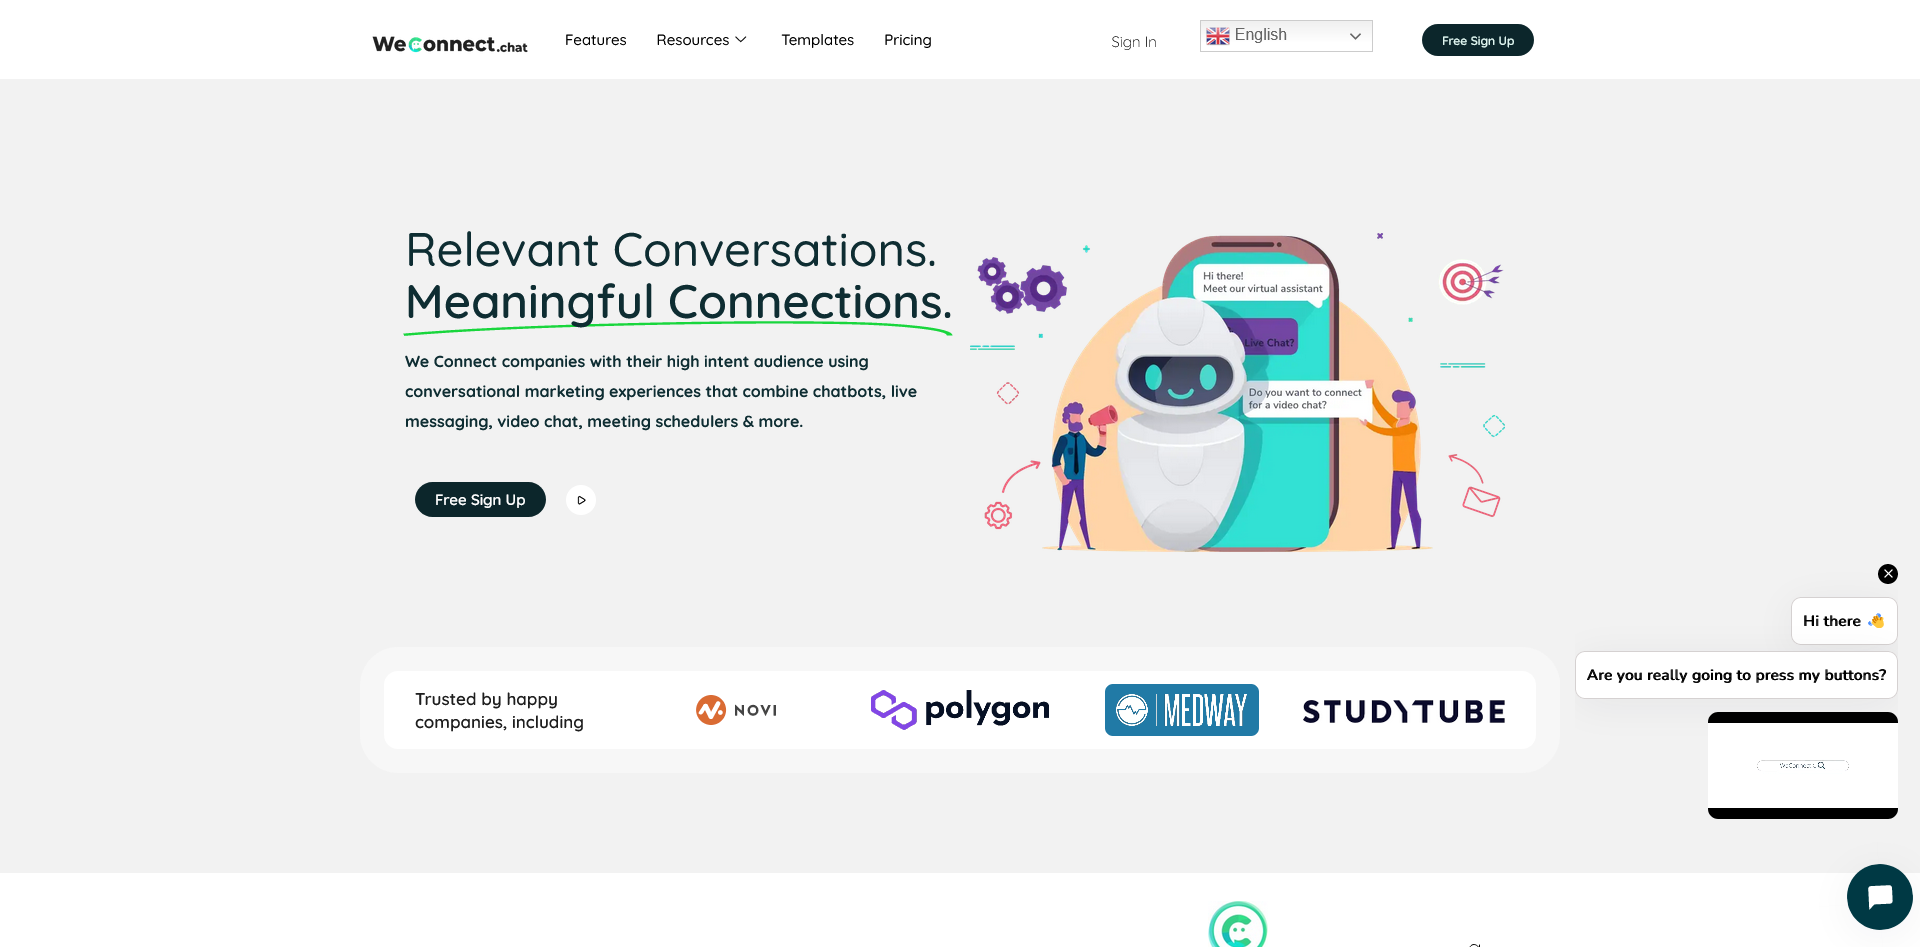 Developing a Chatbot SaaS Application and Mobile Application for WeConnet.chat: A Case Study